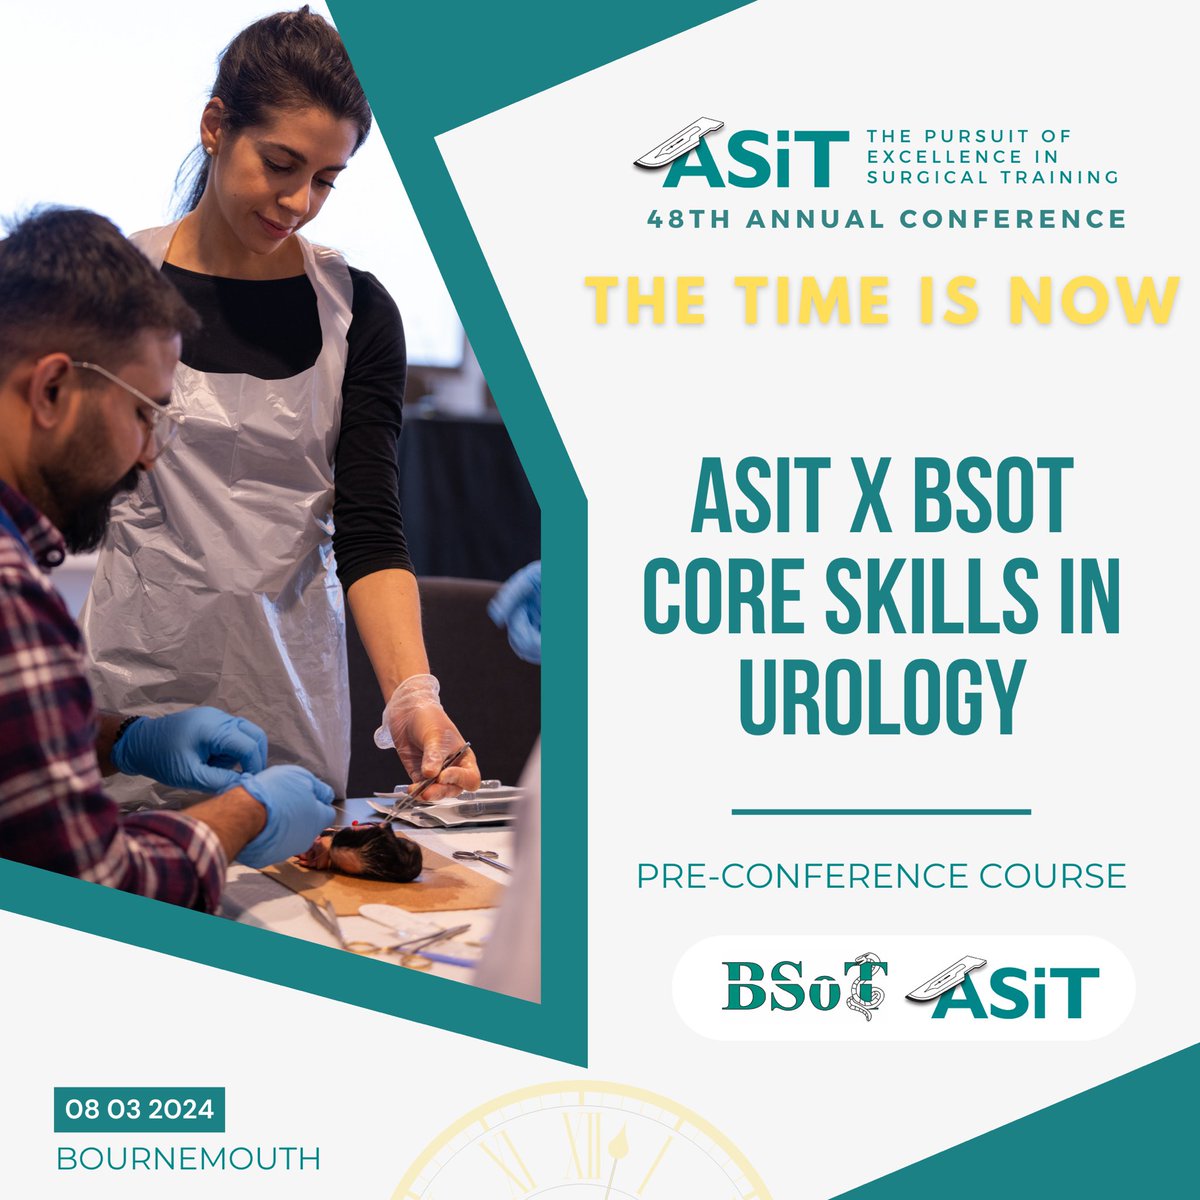 🫘 ASiT x BSoT Core Skills in Urology Course 🫘 You know #urine for a treat when it’s our urology course! (Just take a look at the range of skills covered 🤩👇) First delivered at ASiT2019, BSoT is back for its 5th year running their urology course at #ASiT2024! @BSoT_UK…